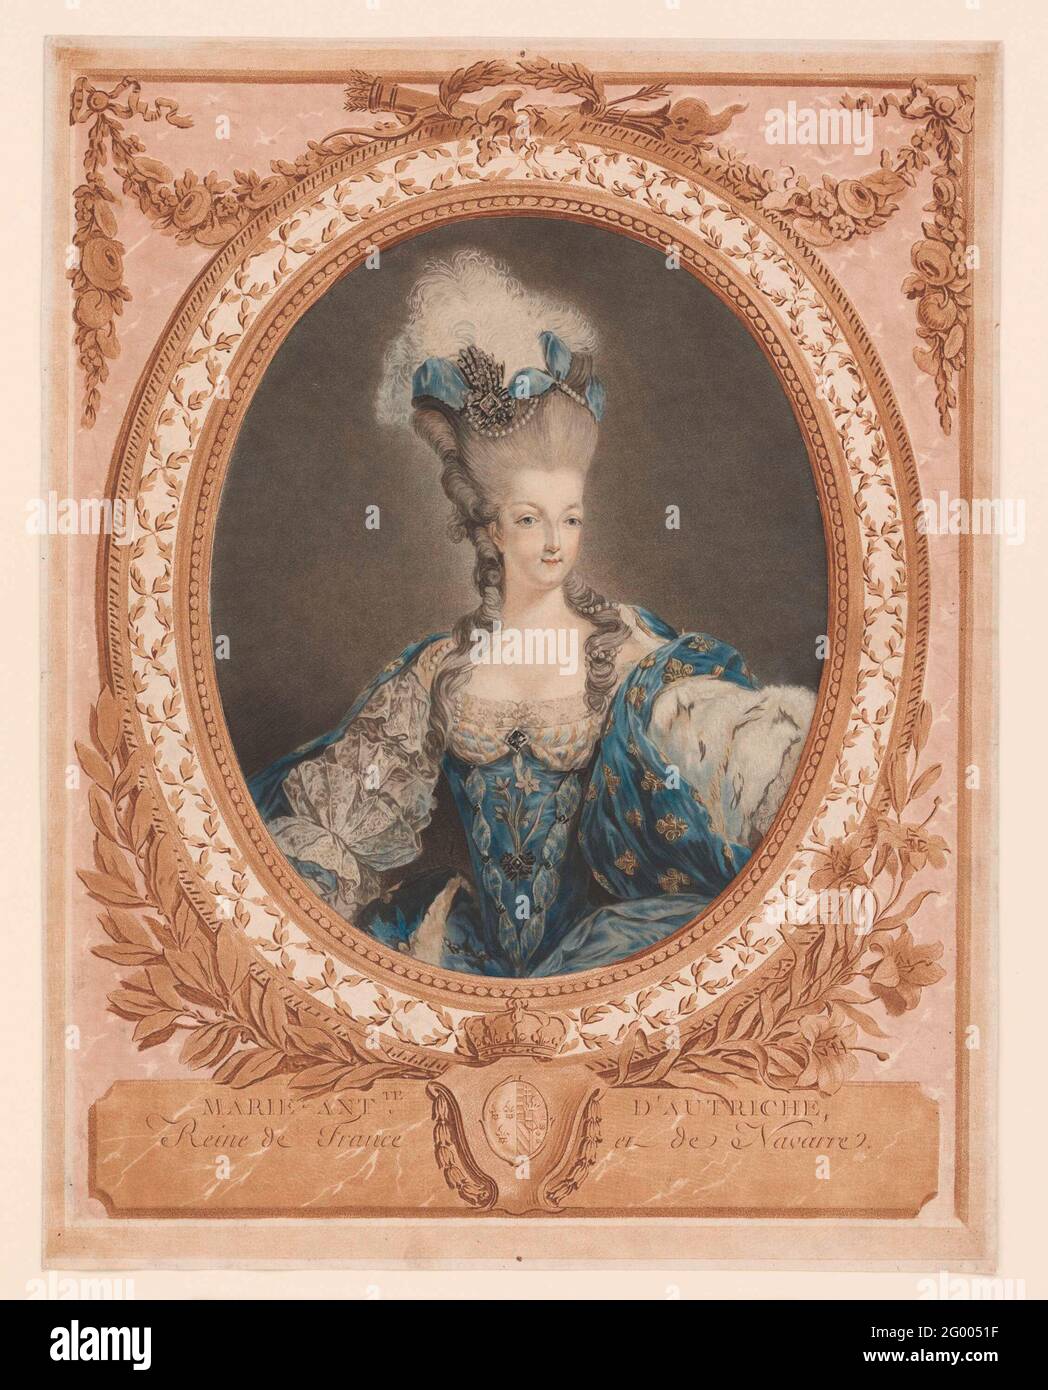 Marie Antoinette: The Queen of Fashion: Portrait of Marie Antoinette.  French queens were expected to set an example in the realm of fashion. As  the wife of Louis XVI, Marie Antoinette threw